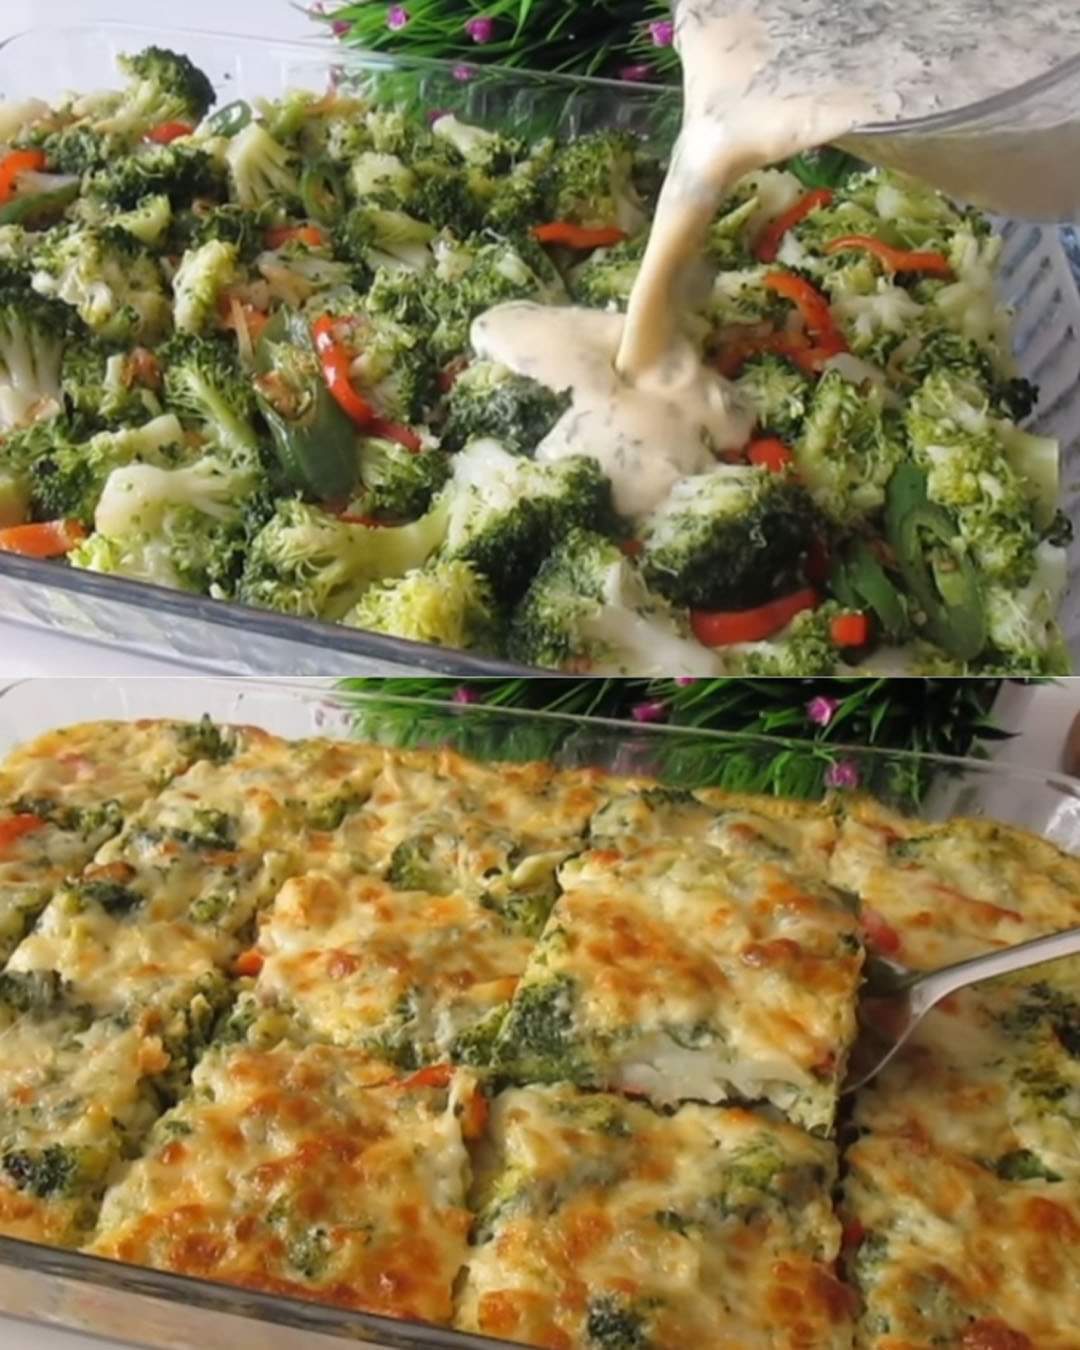 Recipe for a Vegetable Pie Without a Crust